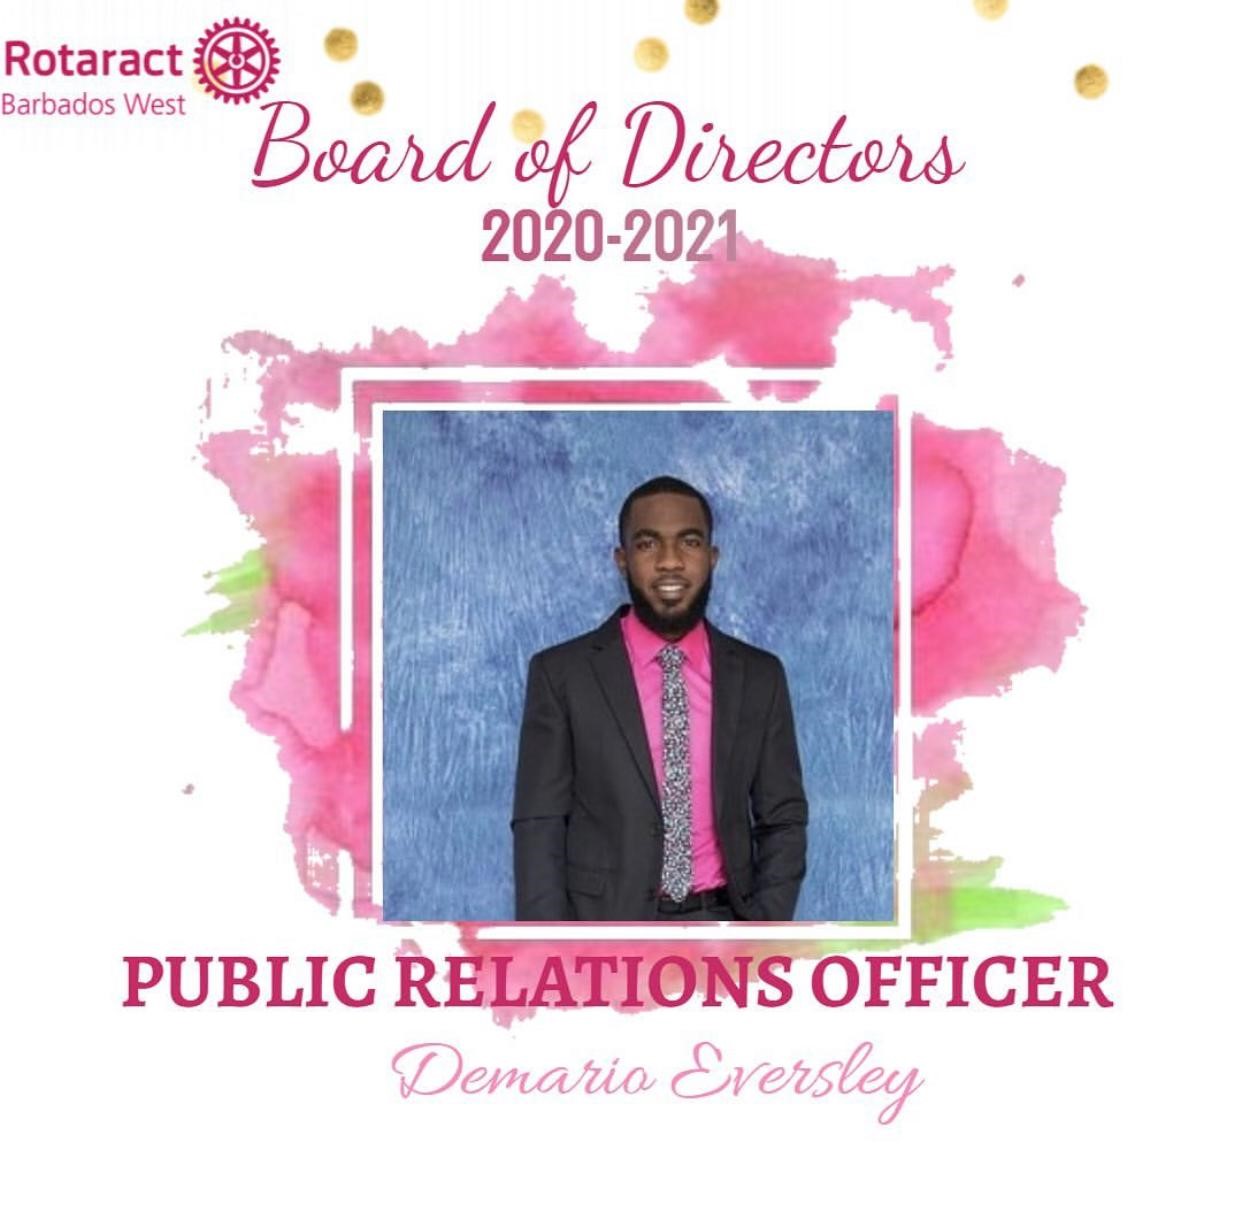 Public relations officer